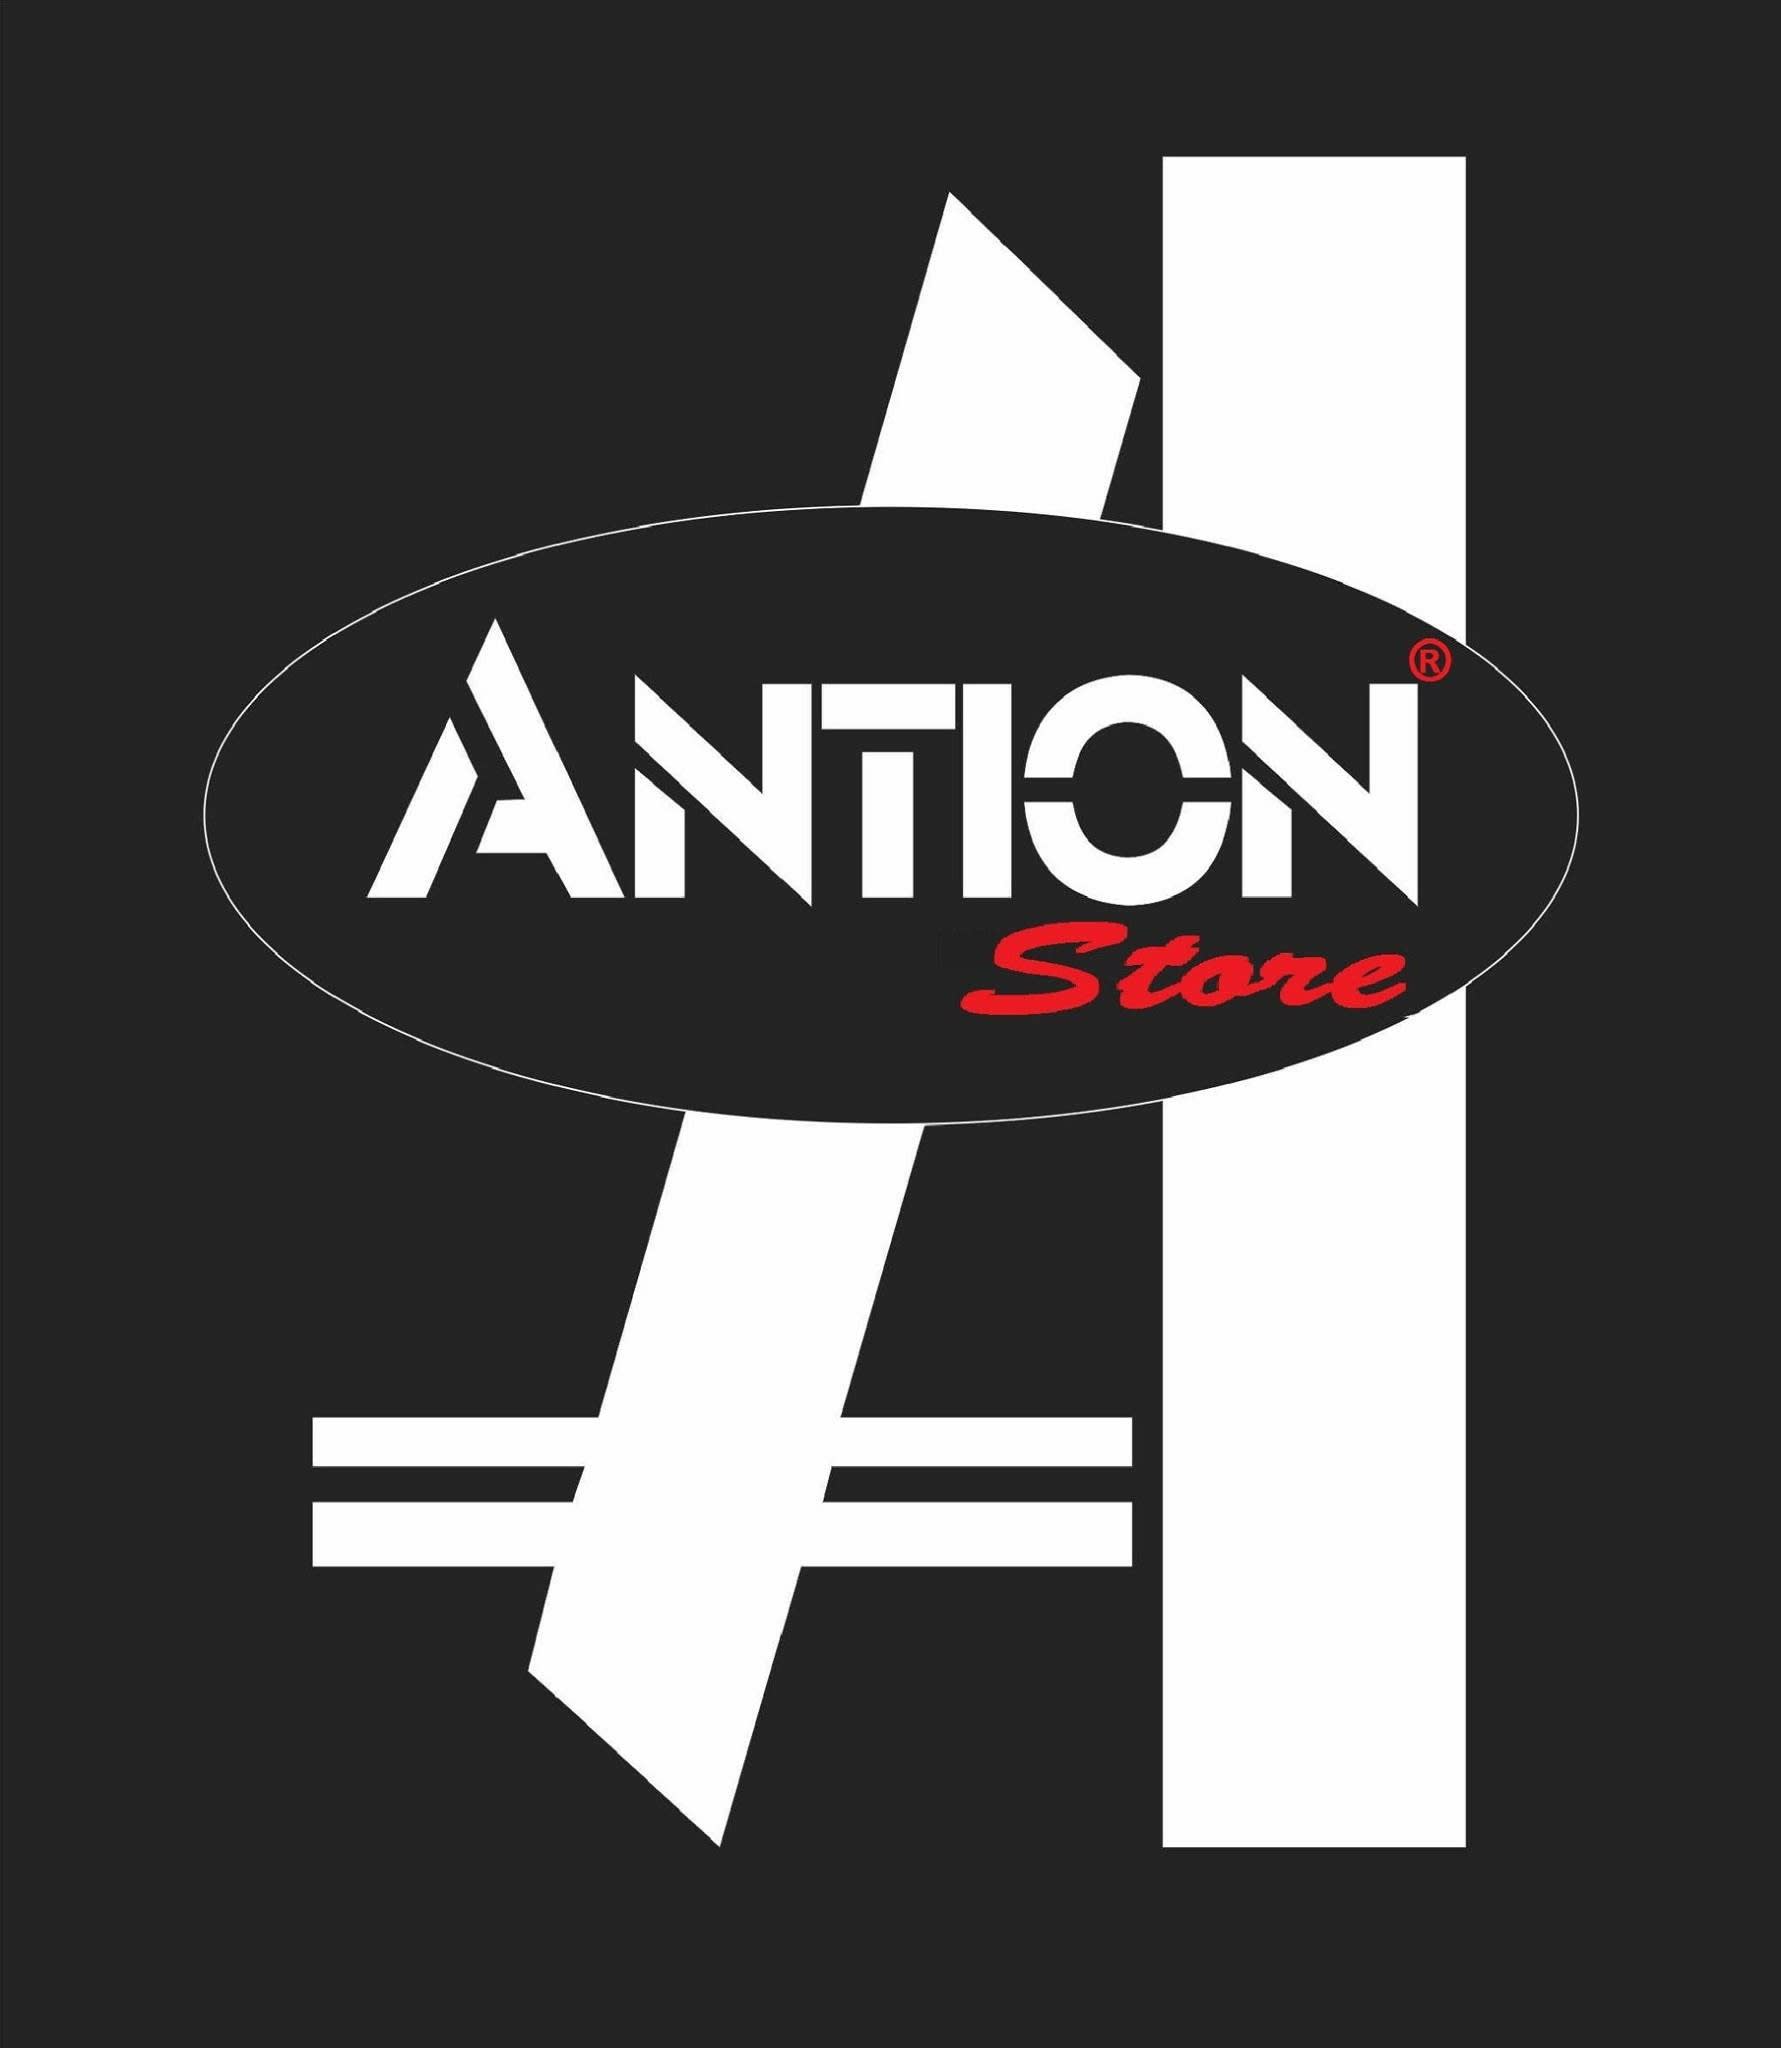 Antion Store